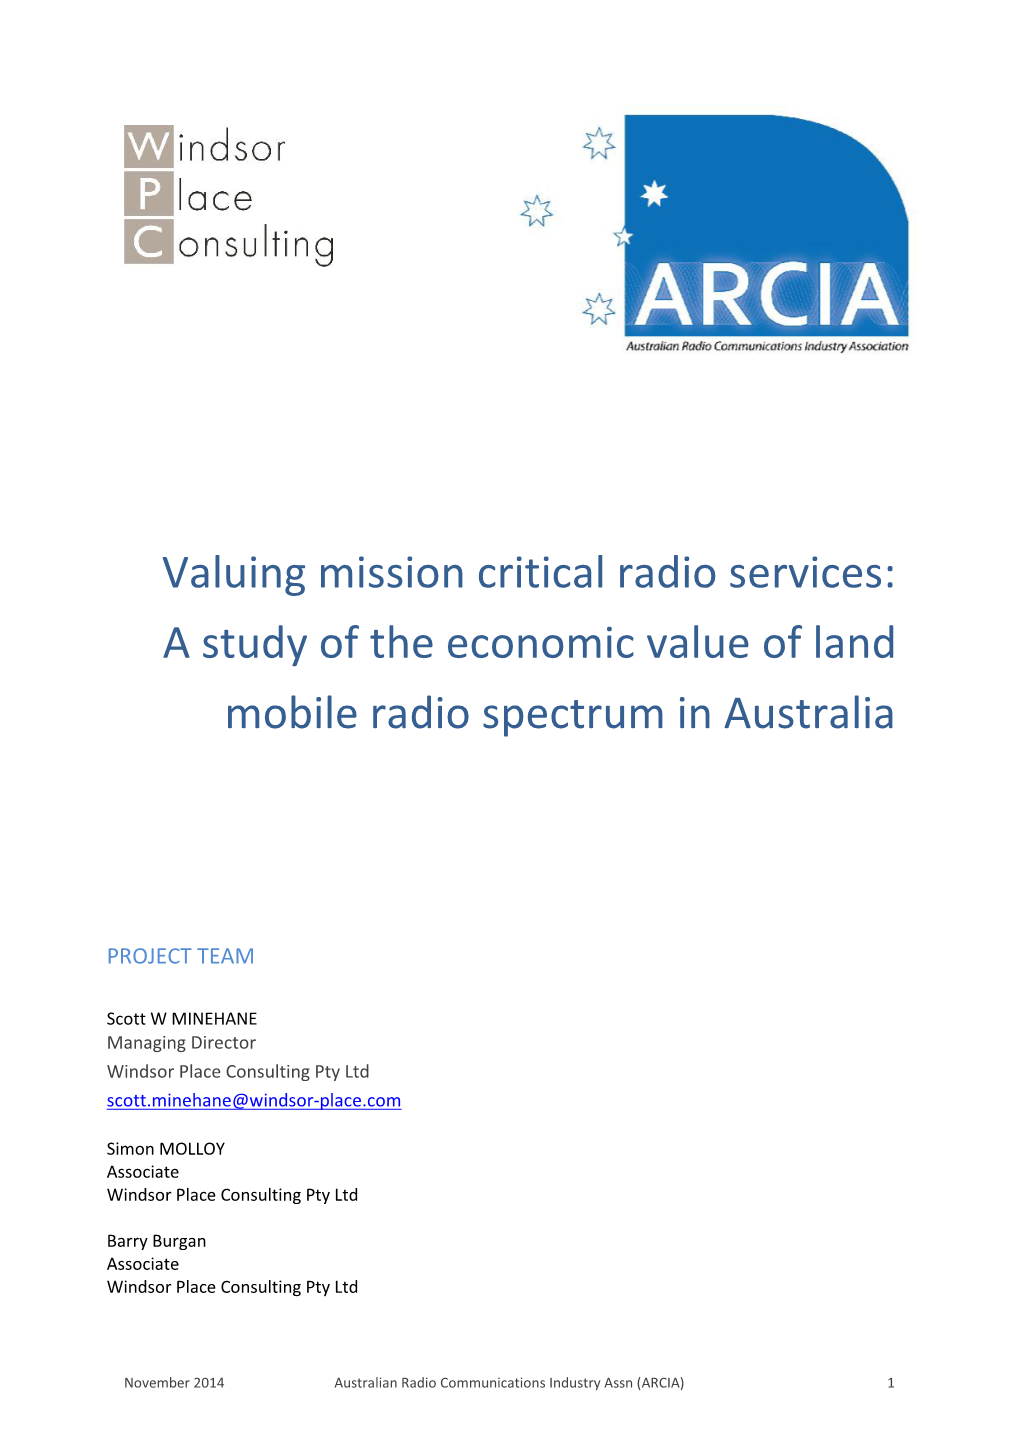 Valuing Mission Critical Radio Services: a Study of the Economic Value of Land Mobile Radio Spectrum in Australia